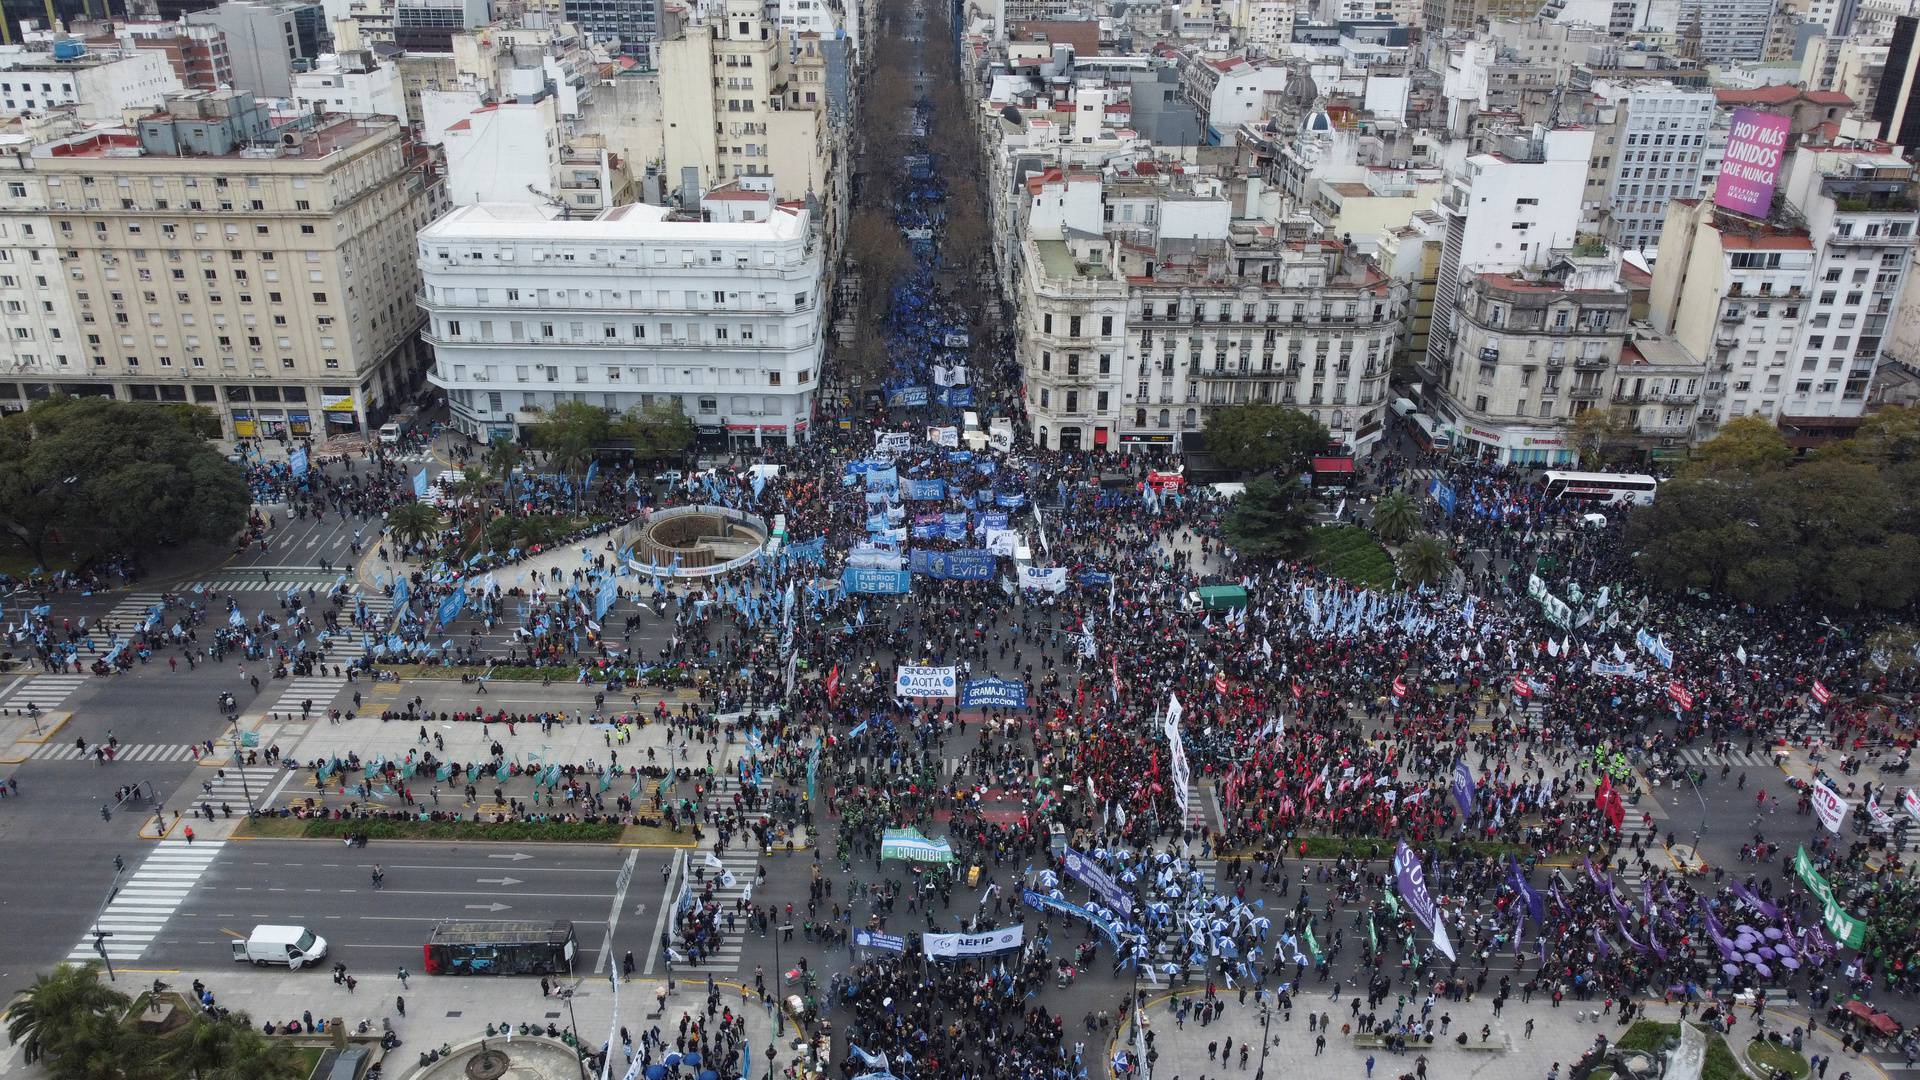 Argentines rally to demand higher wages, subsidies to fight high inflation